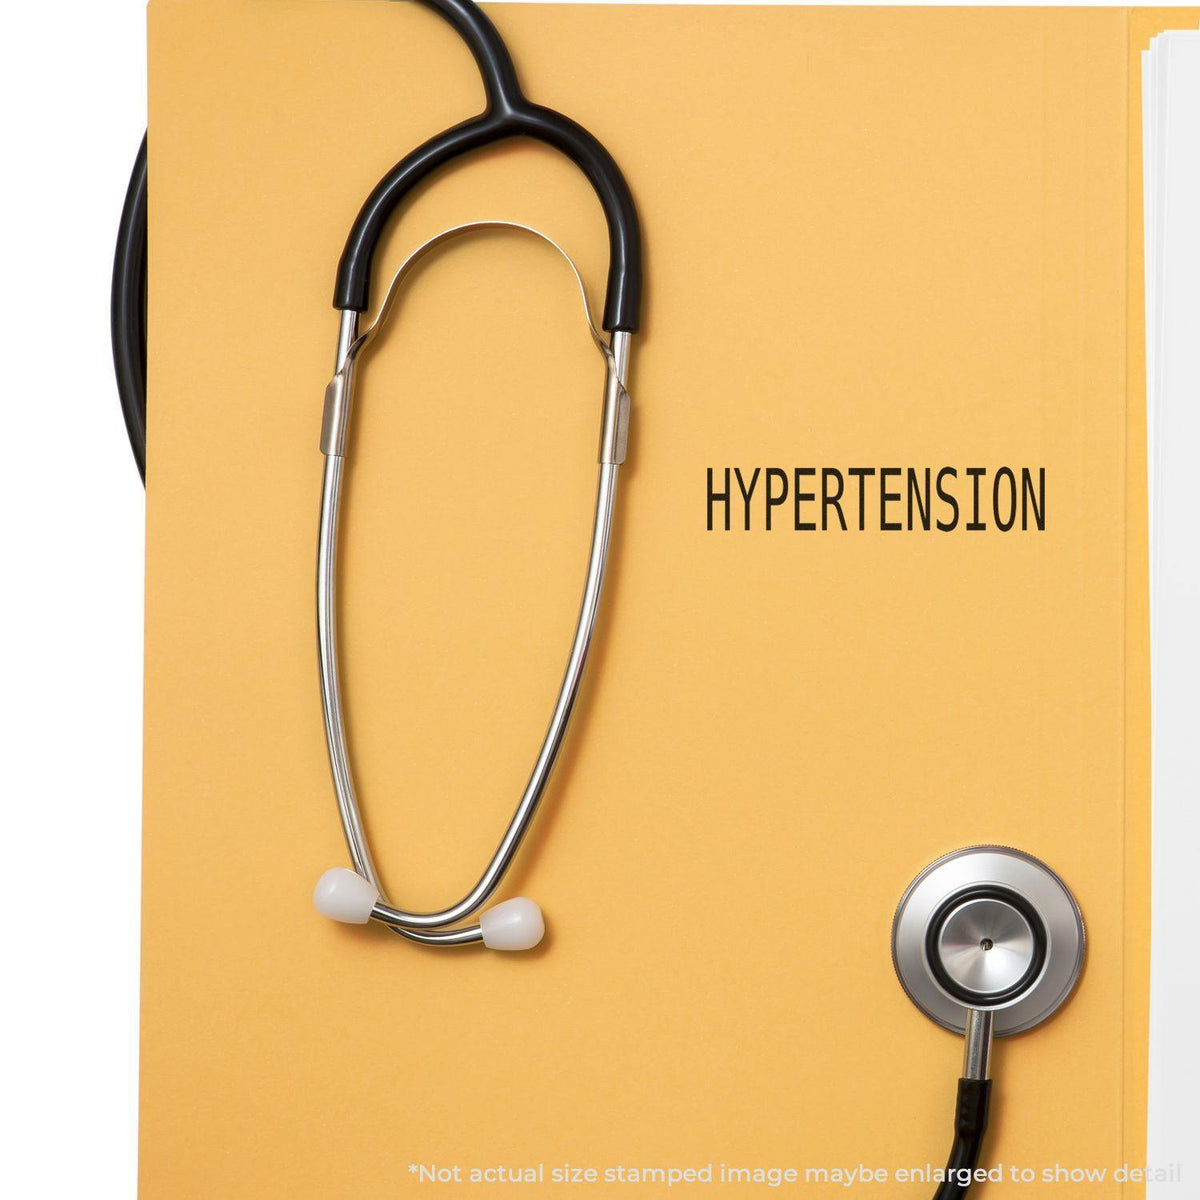 Large Hypertension Rubber Stamp In Use Photo